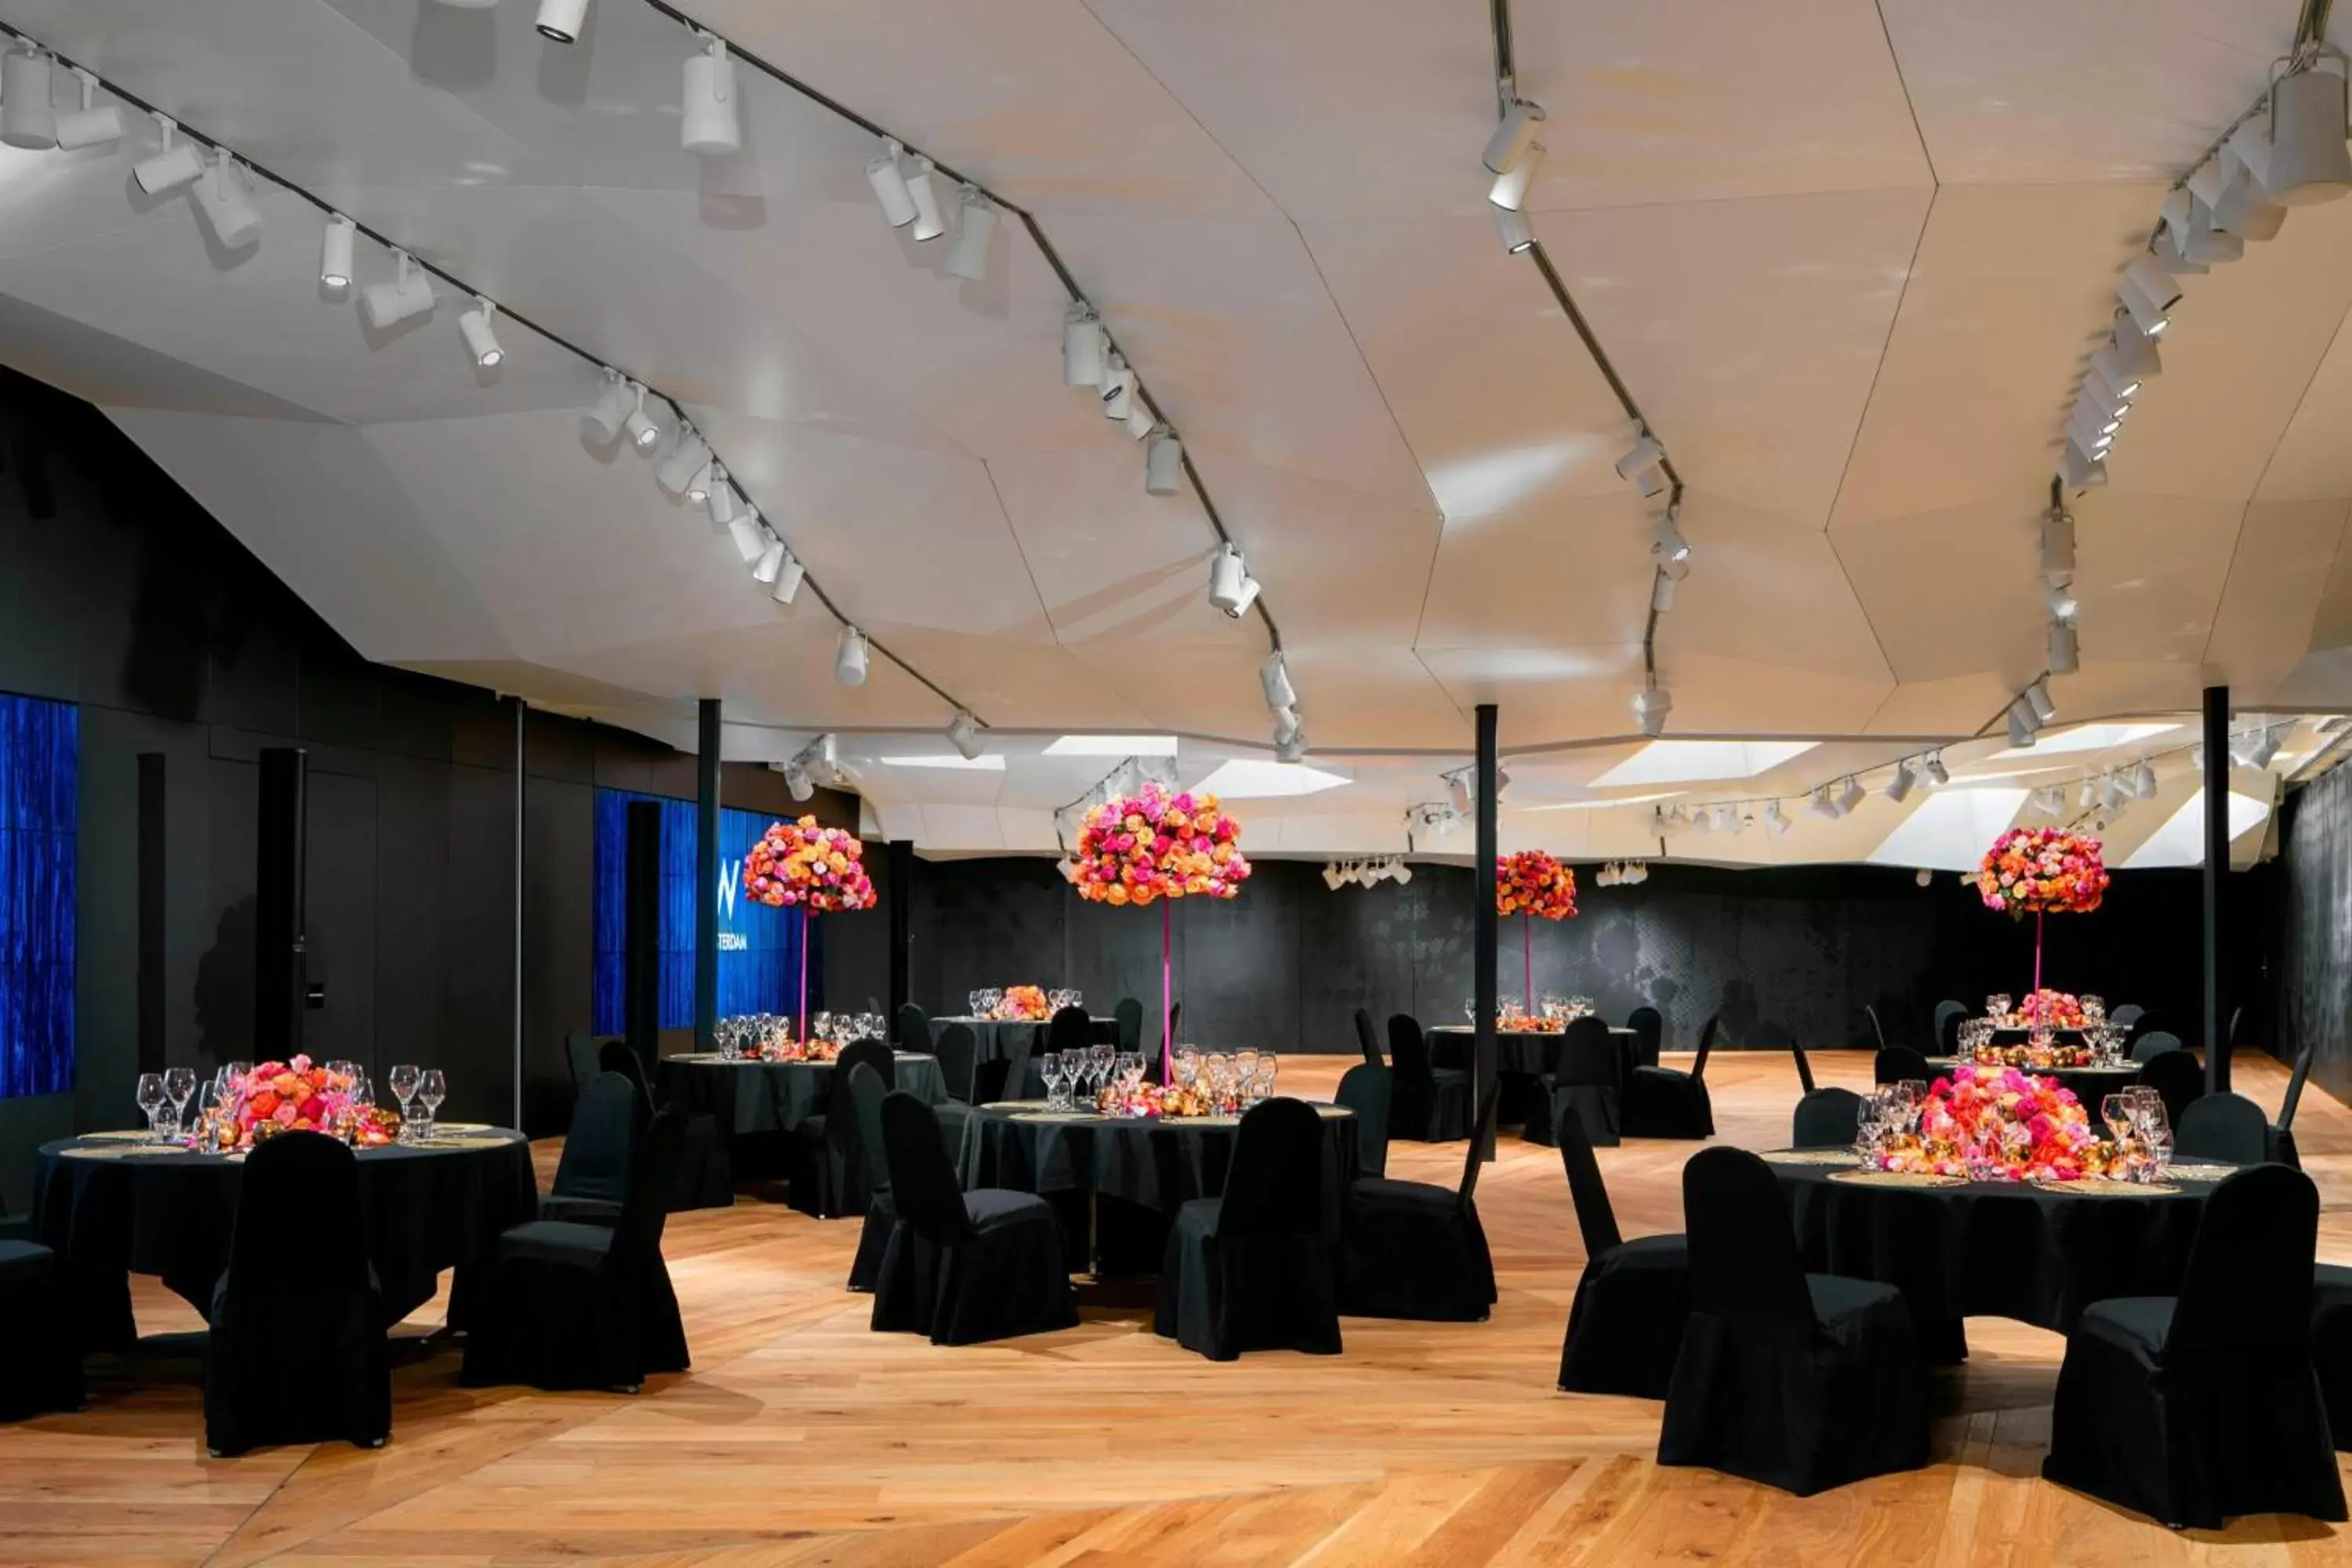 Meeting/conference room, Banquet Facilities in W Amsterdam